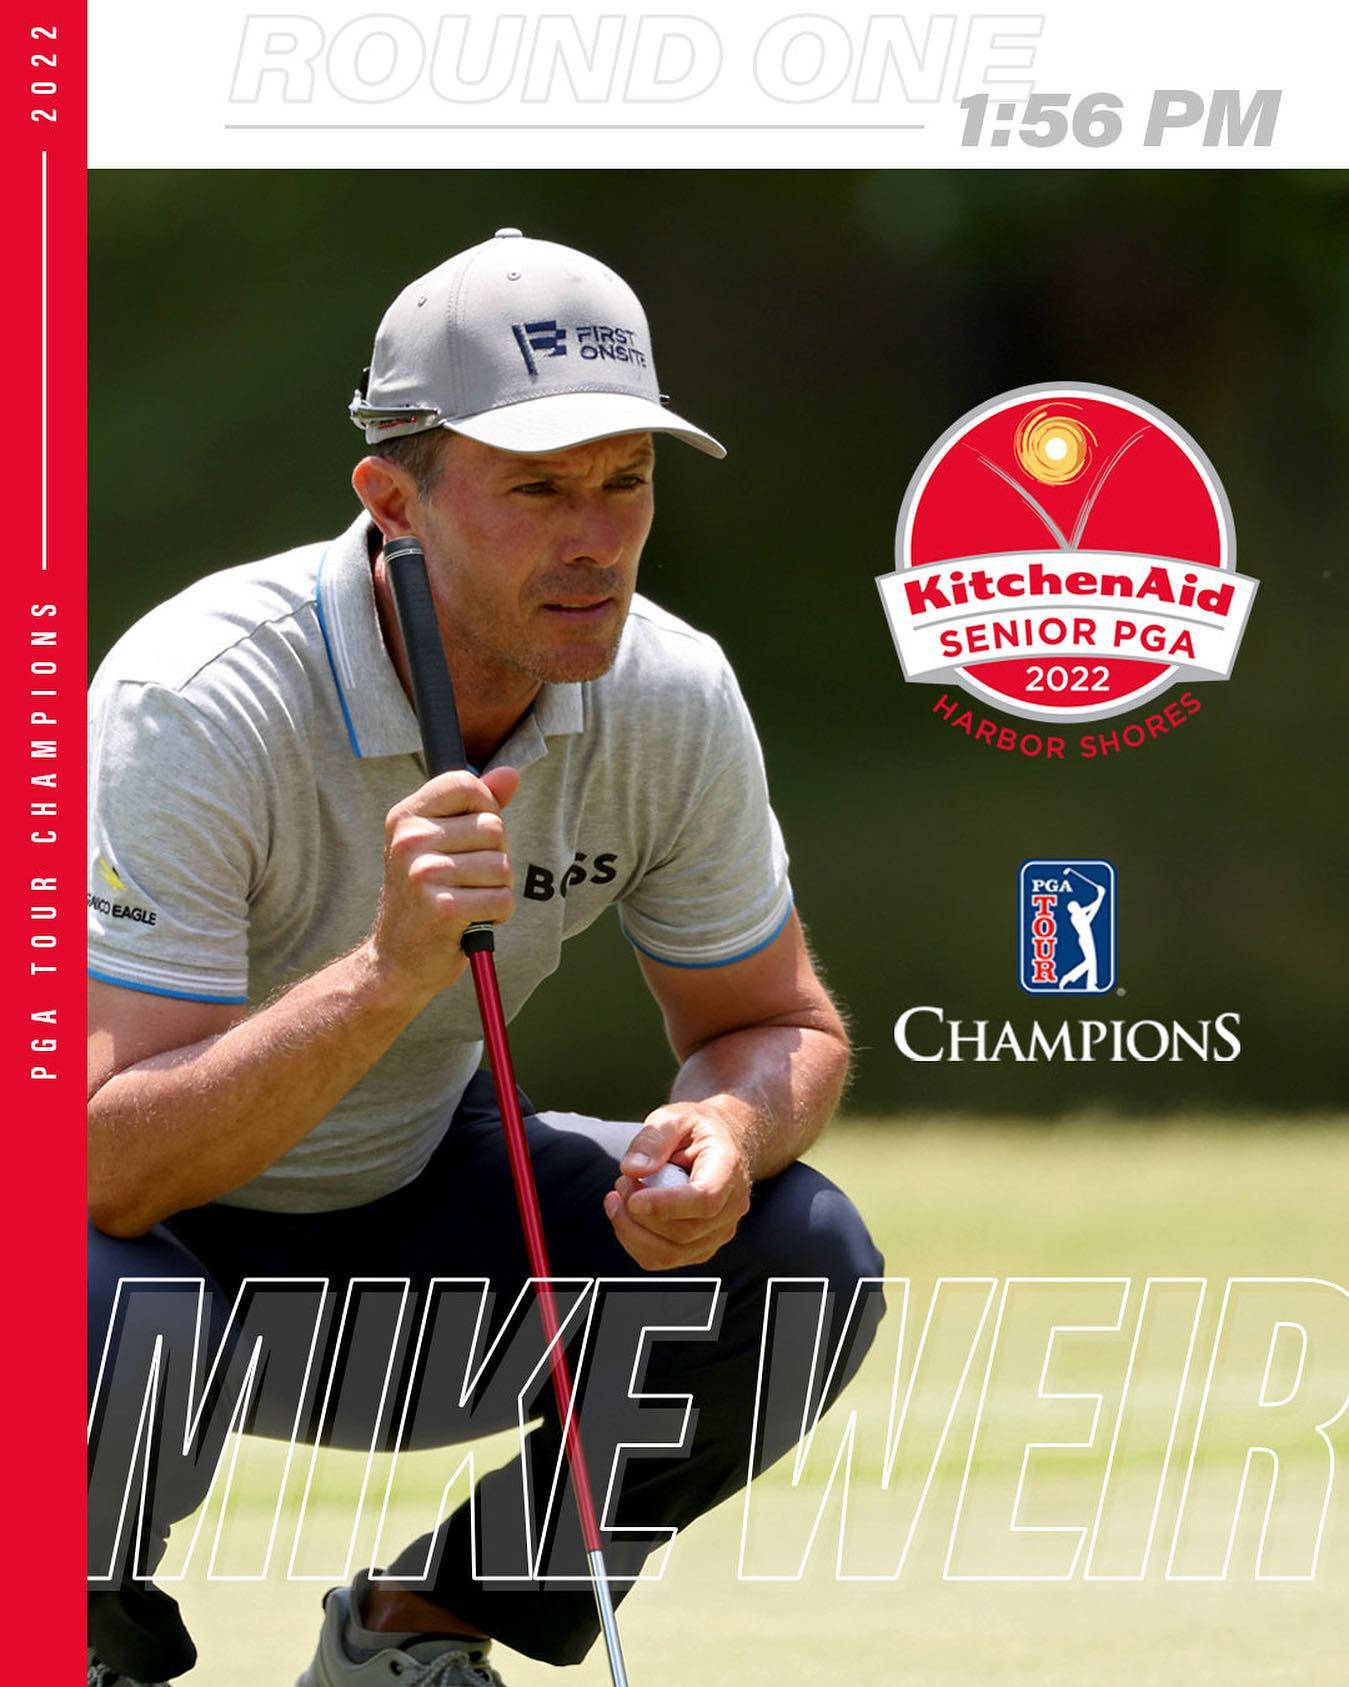 Mike Weir in Action - 2022 Golf Champions Wallpaper